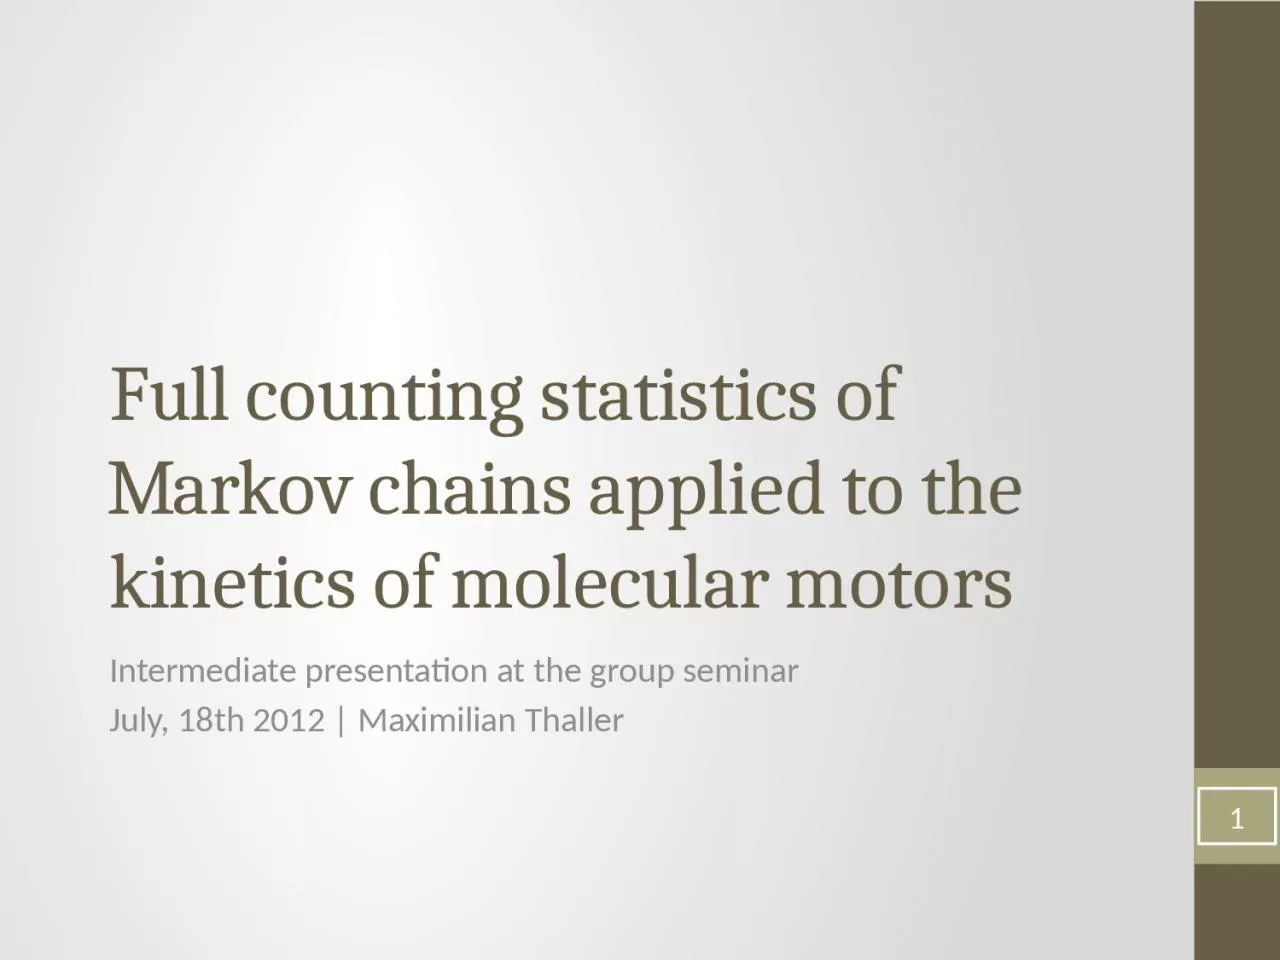 Full counting statistics of Markov chains applied to the kinetics of molecular motors